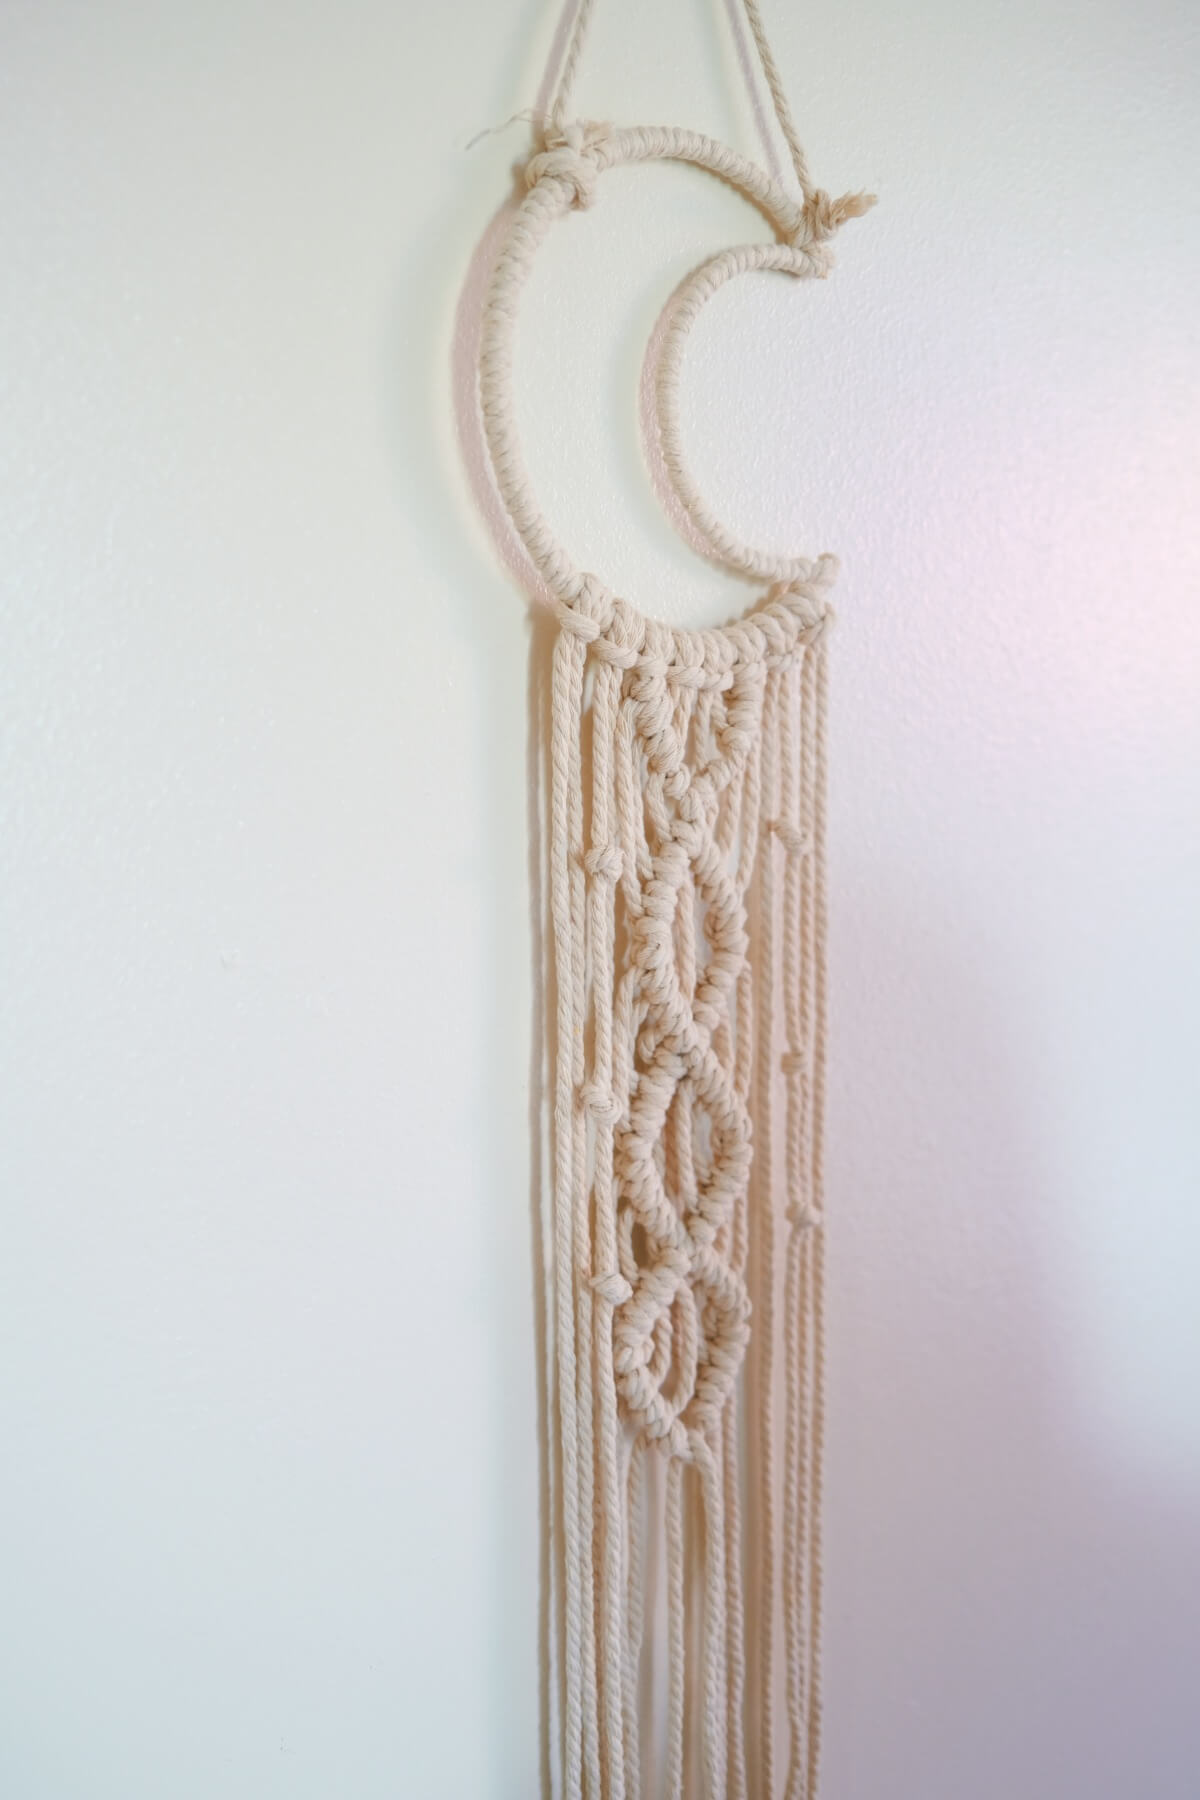 detail of the finished macrame before adding lights